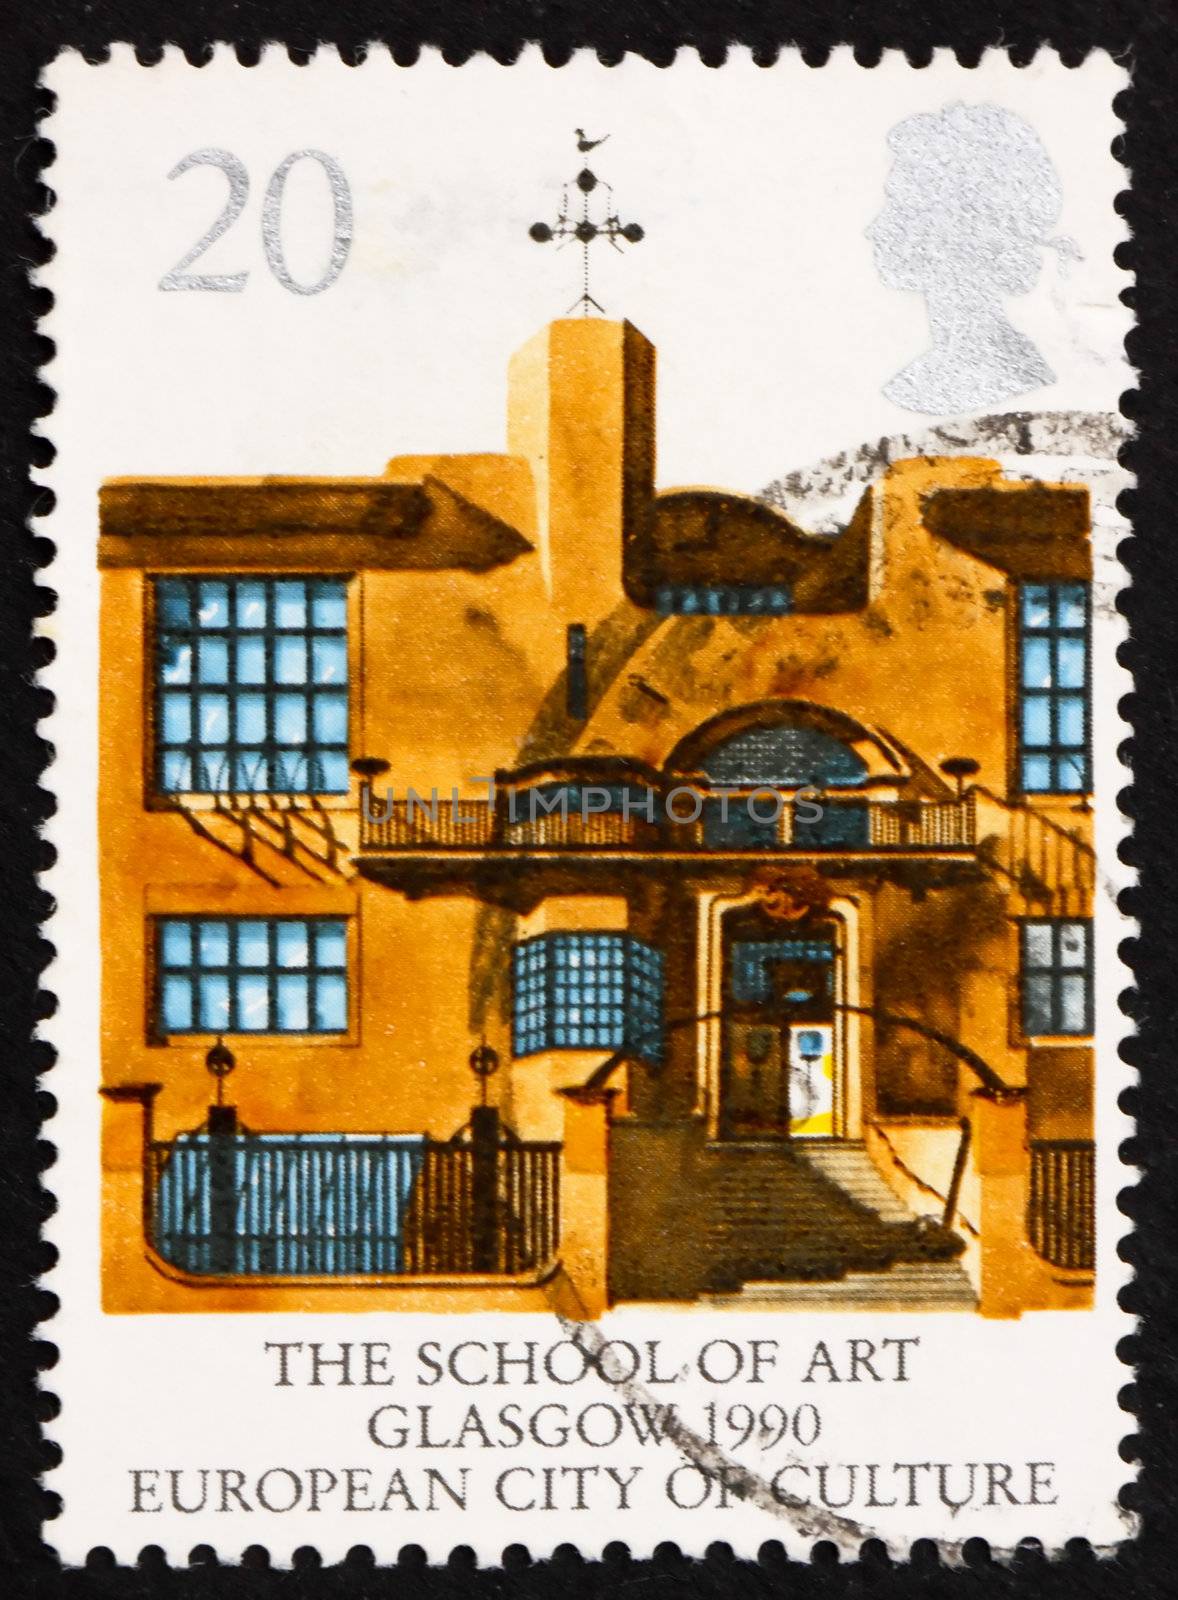 GREAT BRITAIN - CIRCA 1990: a stamp printed in the Great Britain shows School of Art, Glasgow, European City of Culture, circa 1990